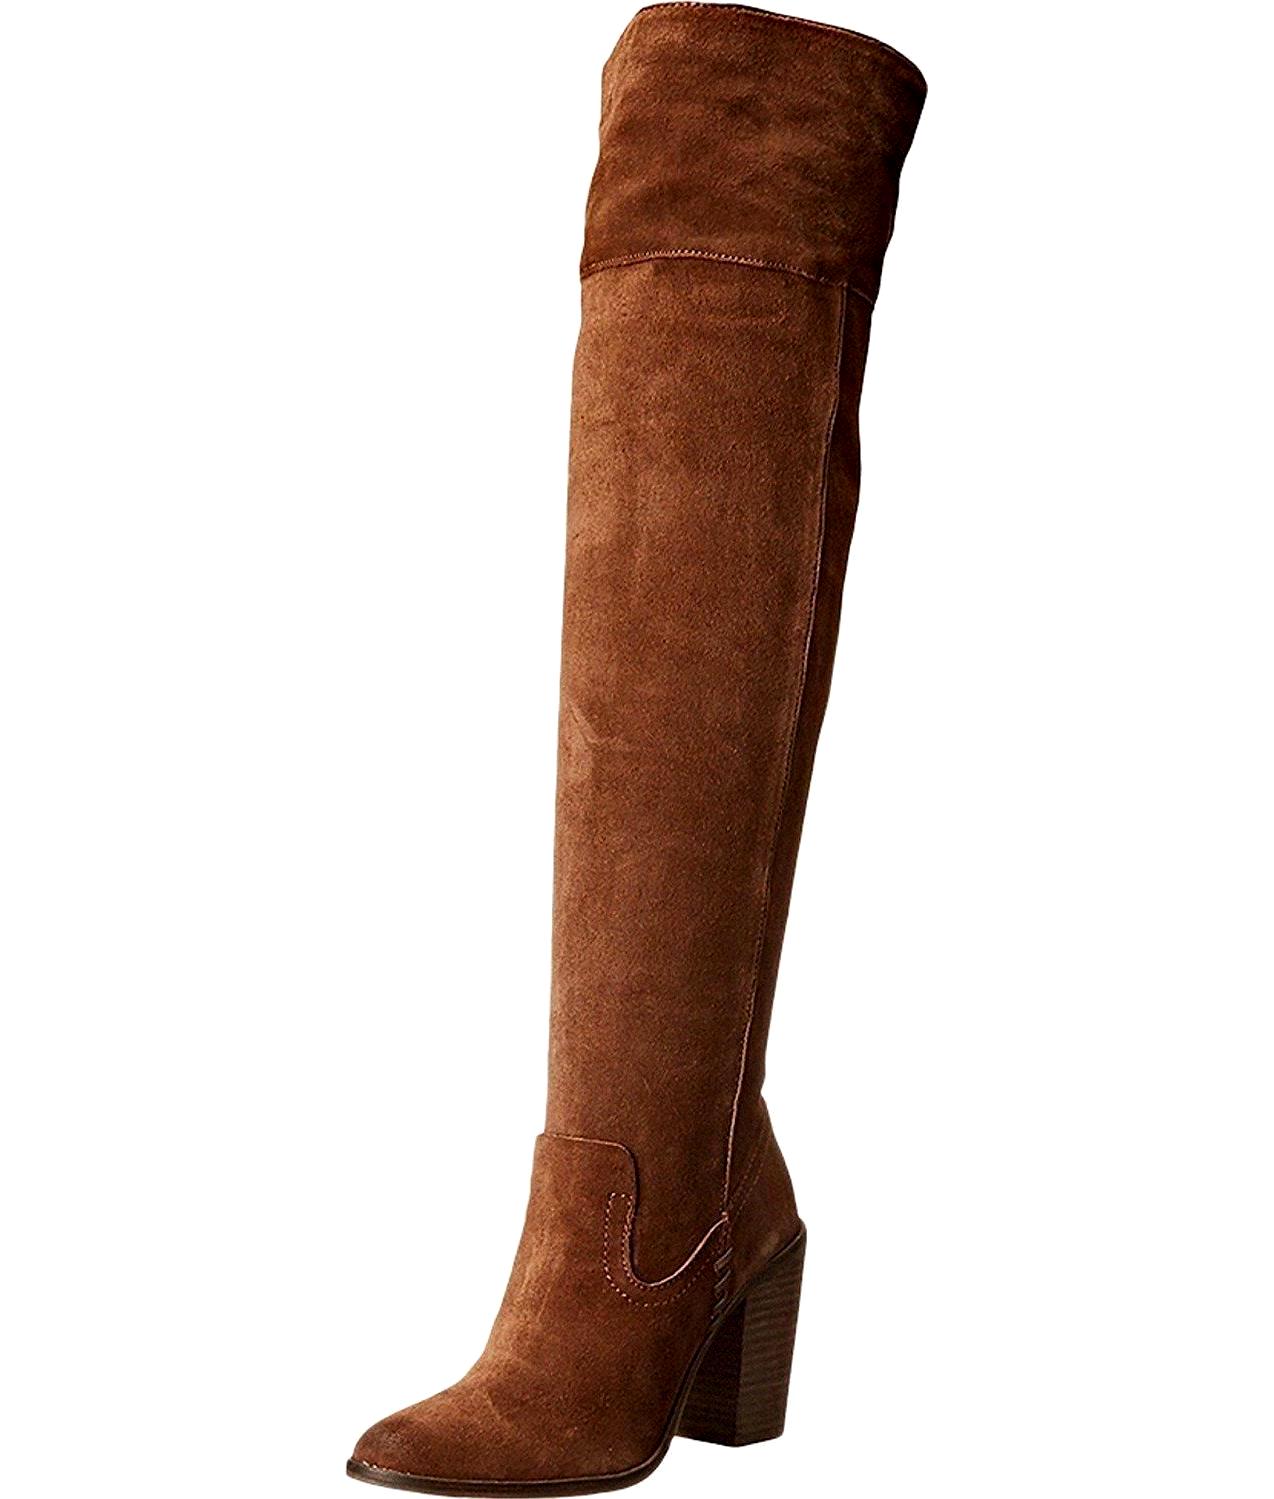 dolce vita tall suede boots